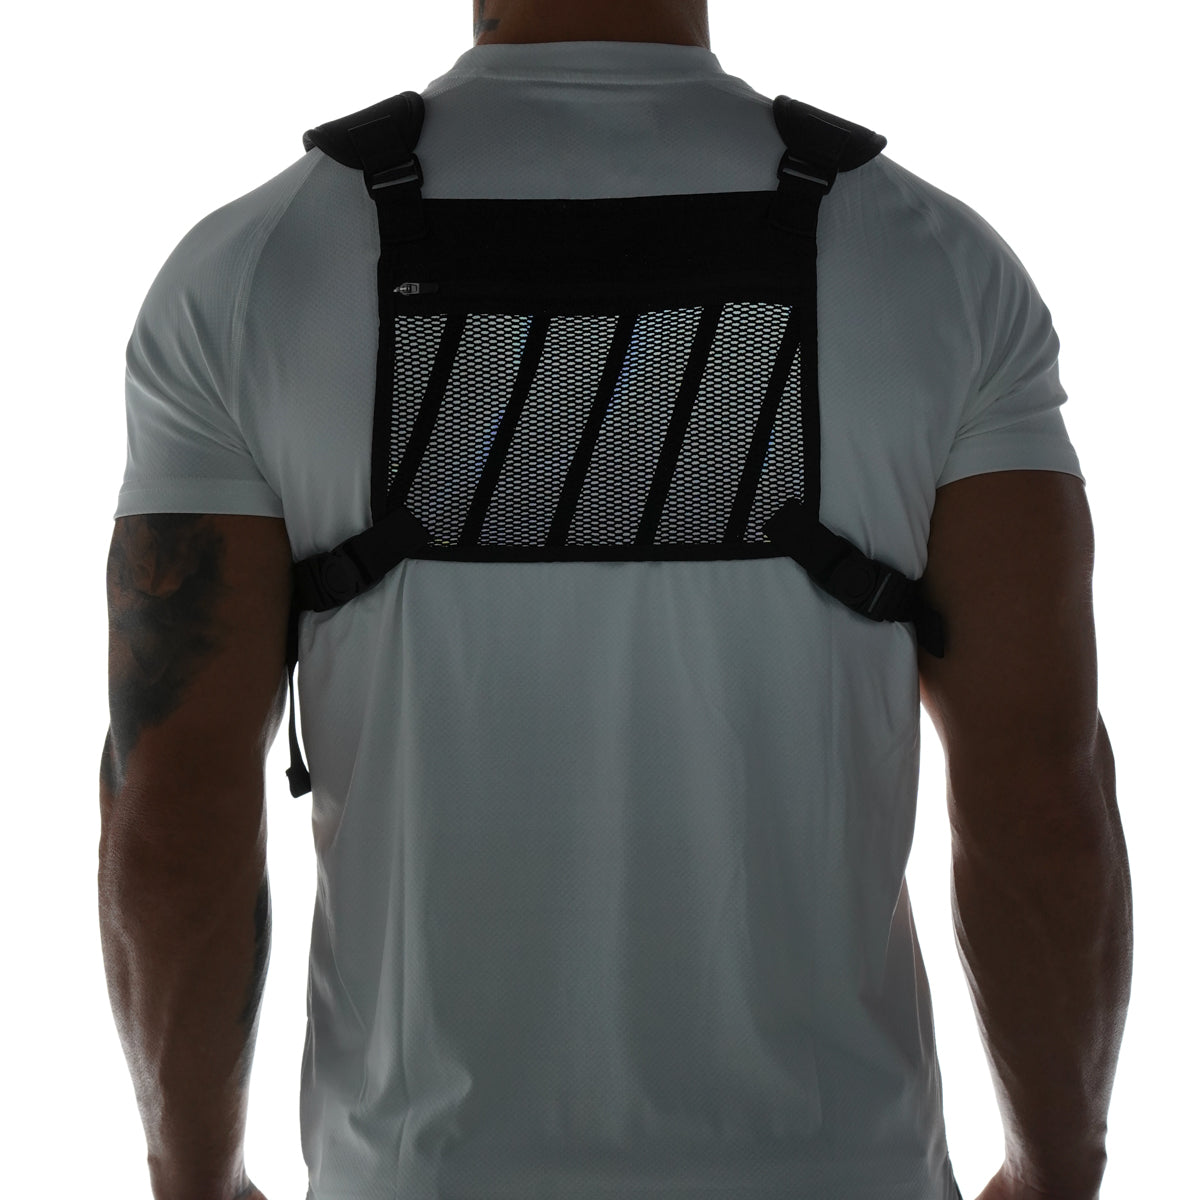 0213. Conditioning Chest Pack - Black Camo - $80.00 | ASRV Second 